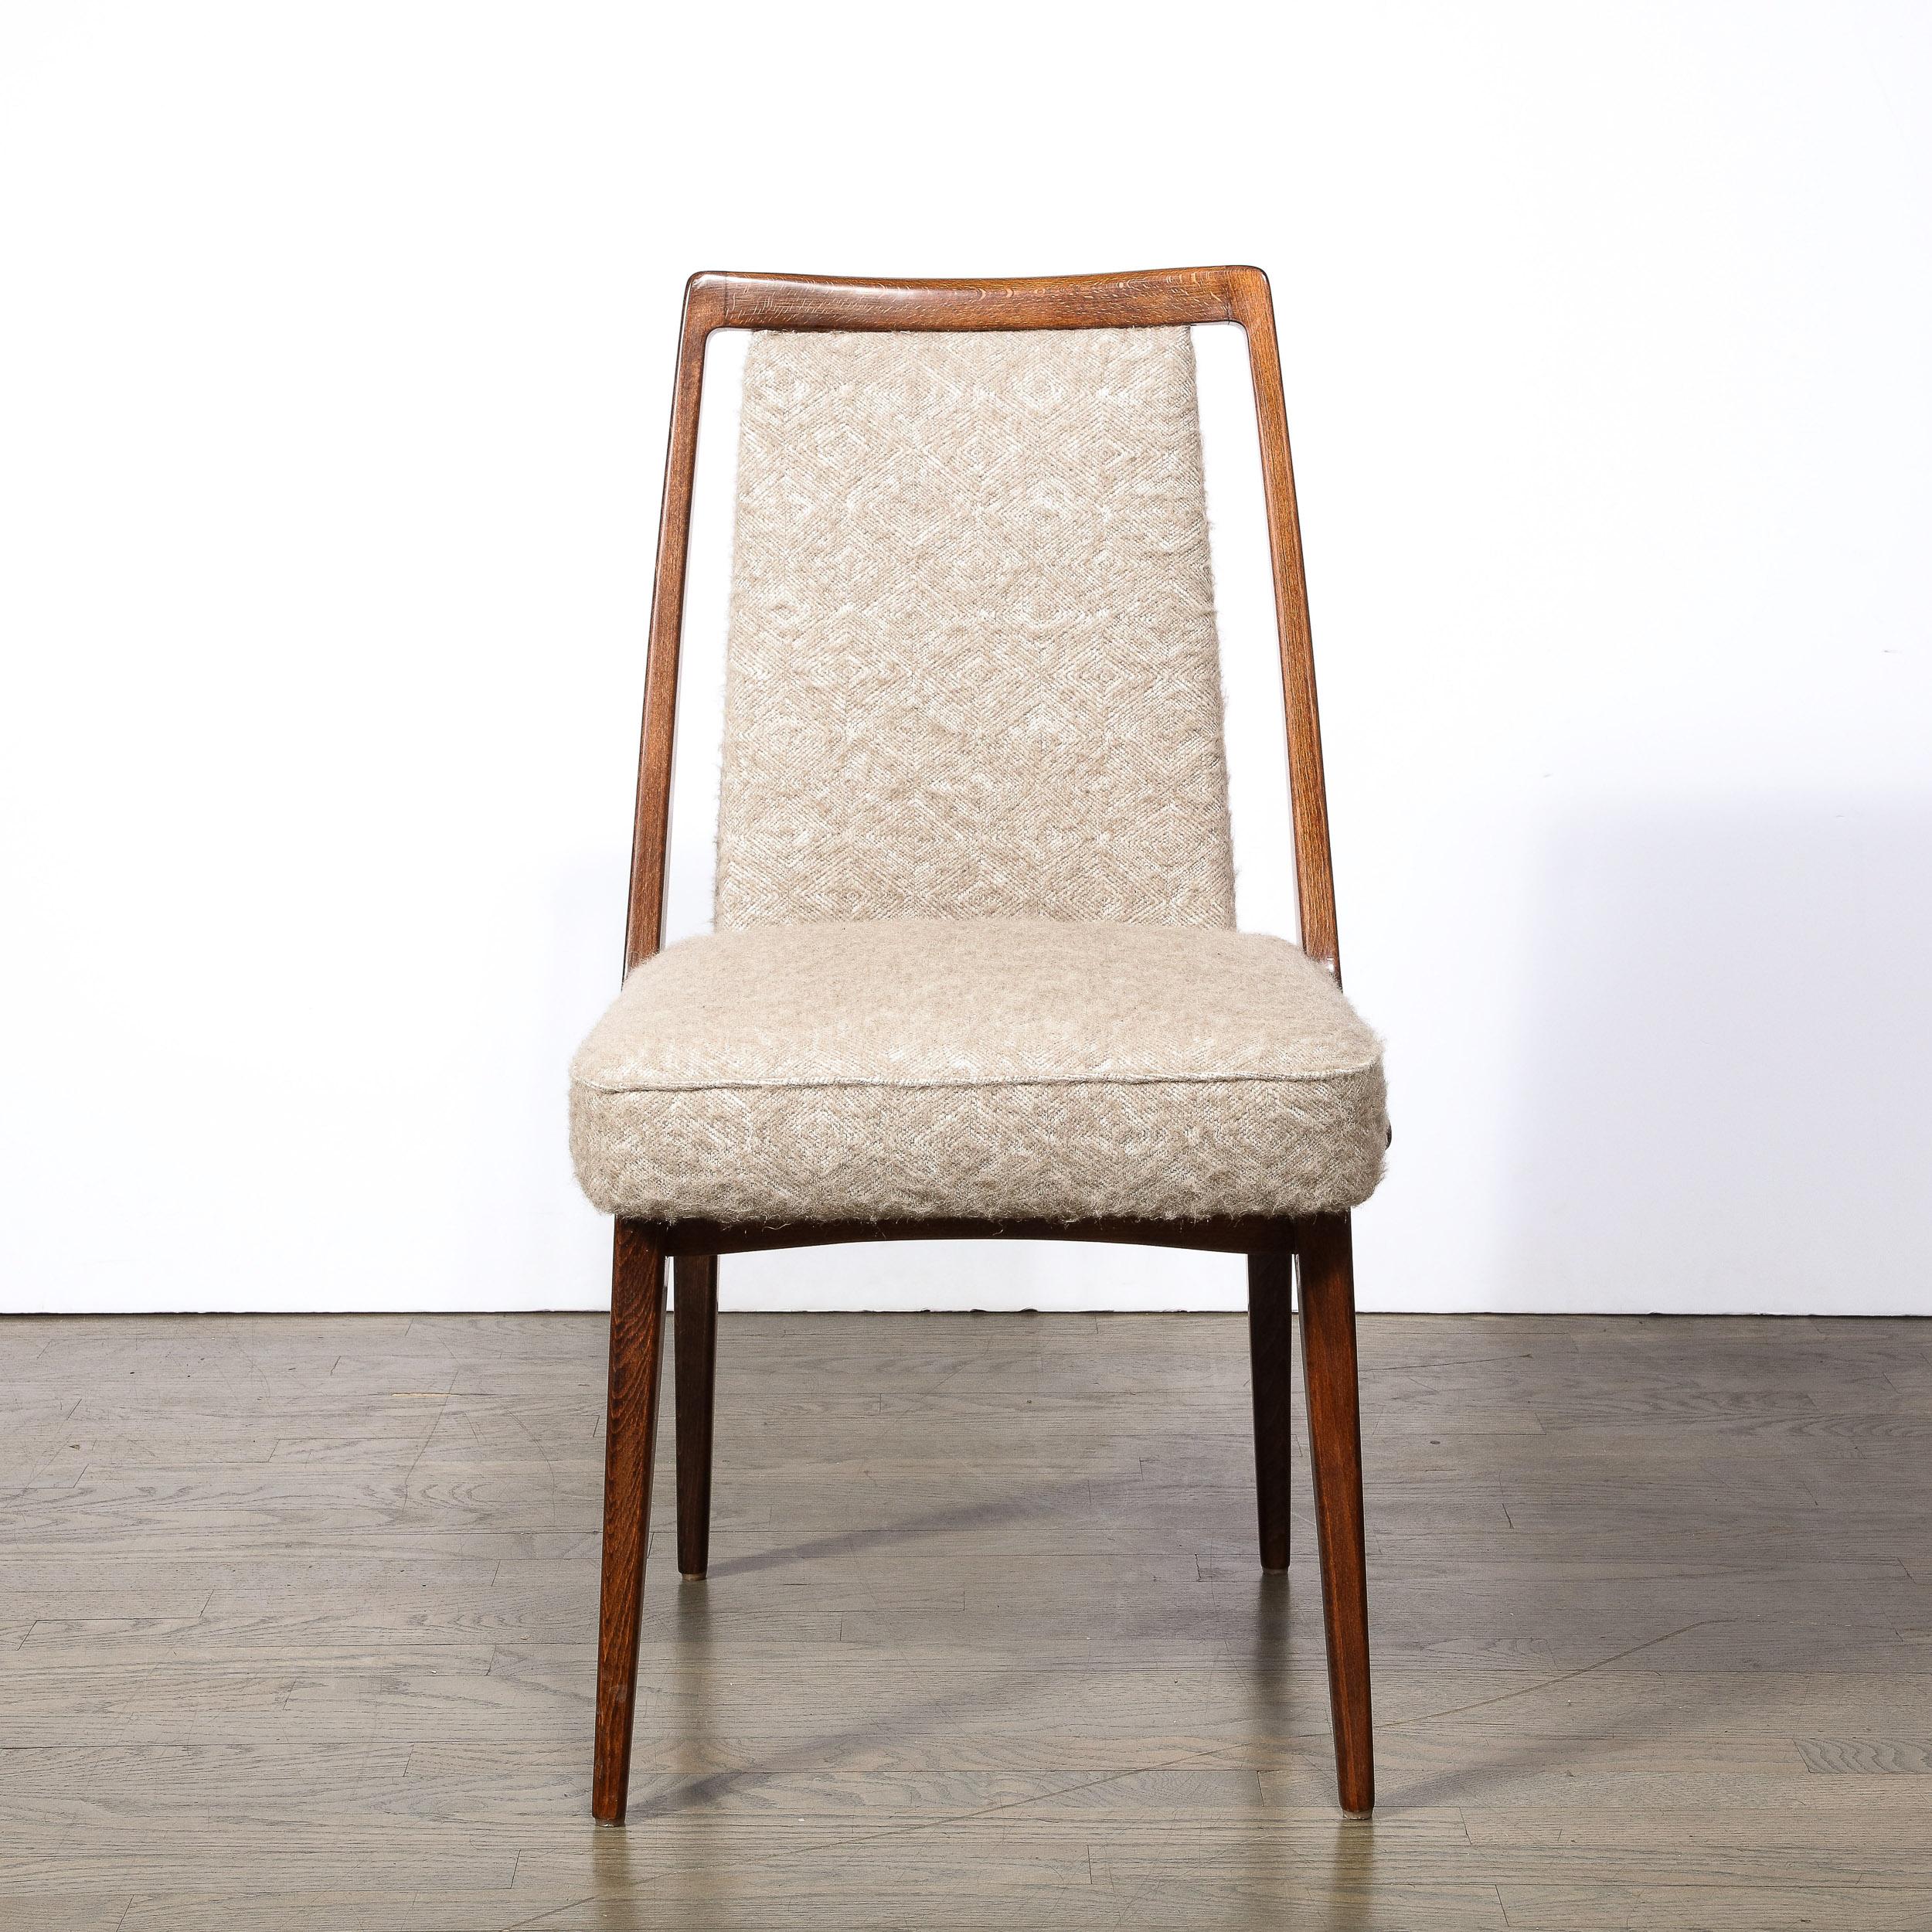 This beautiful Mid-Century Modern chair was realized in the United States circa 1960. It features an open floating rectangular walnut frame that elegantly sits around the rectangular back of the chair, and elegantly wraps around the seat. The legs